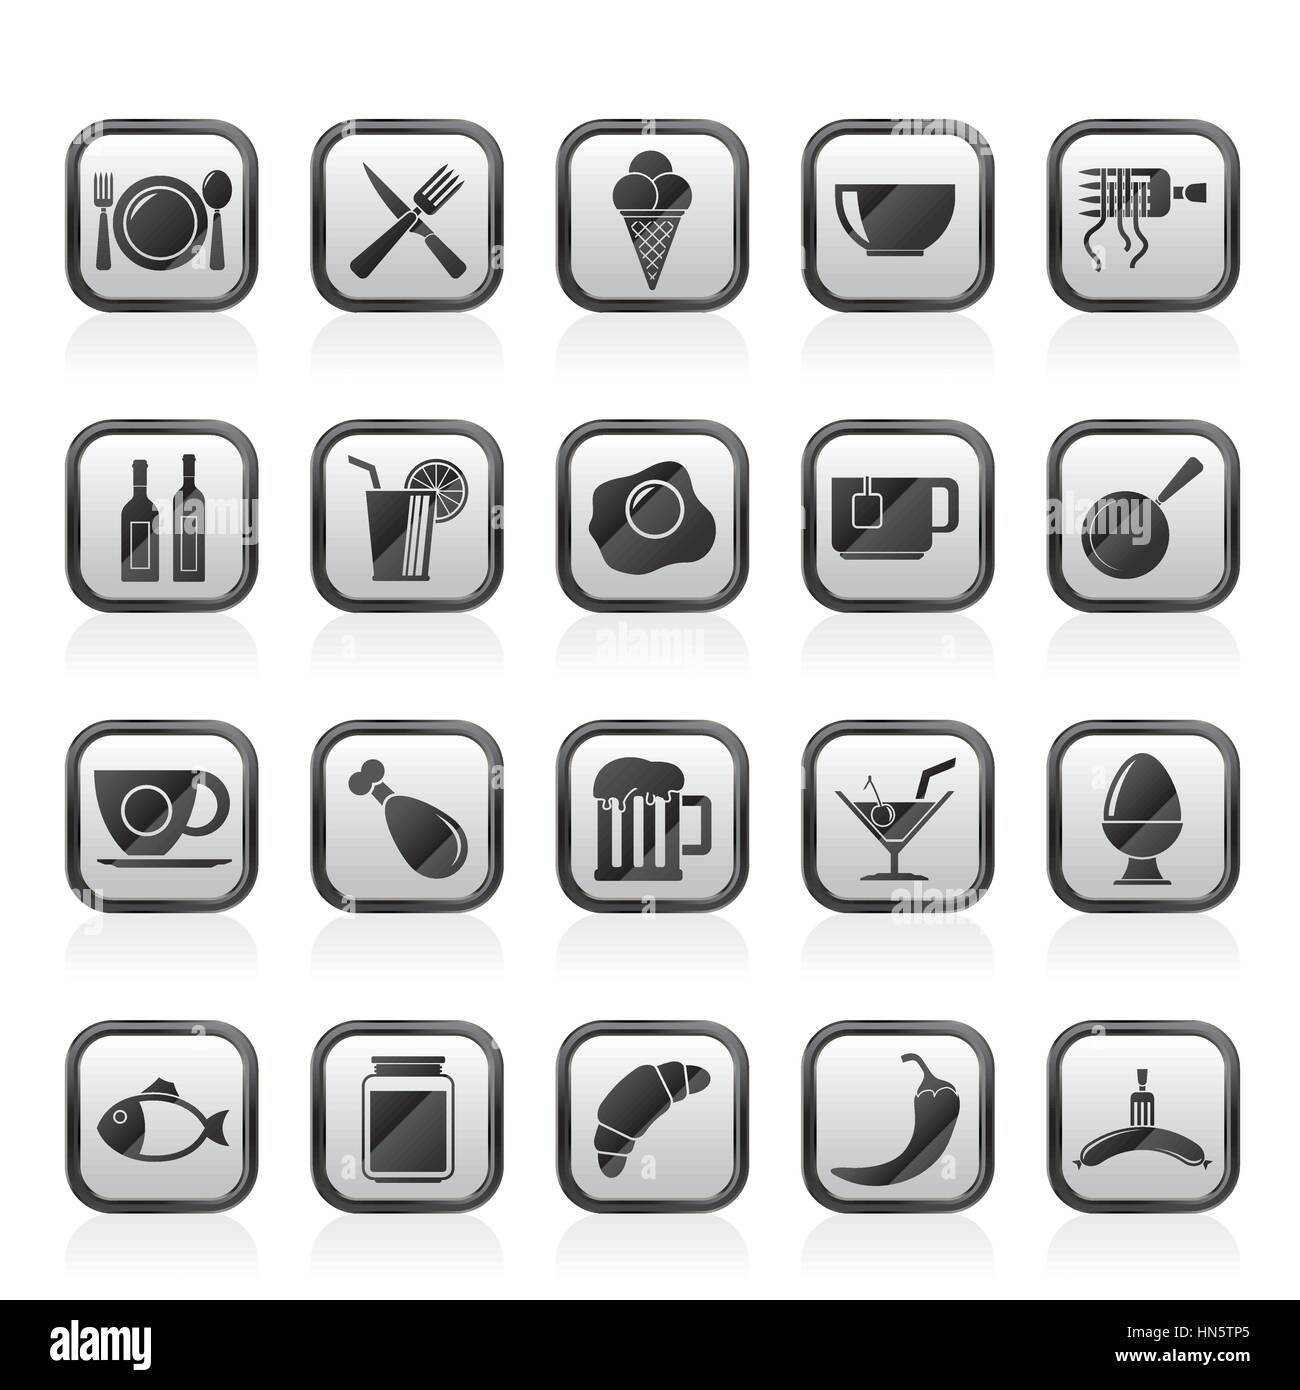 Food, drink and restaurant icons Stock Vector